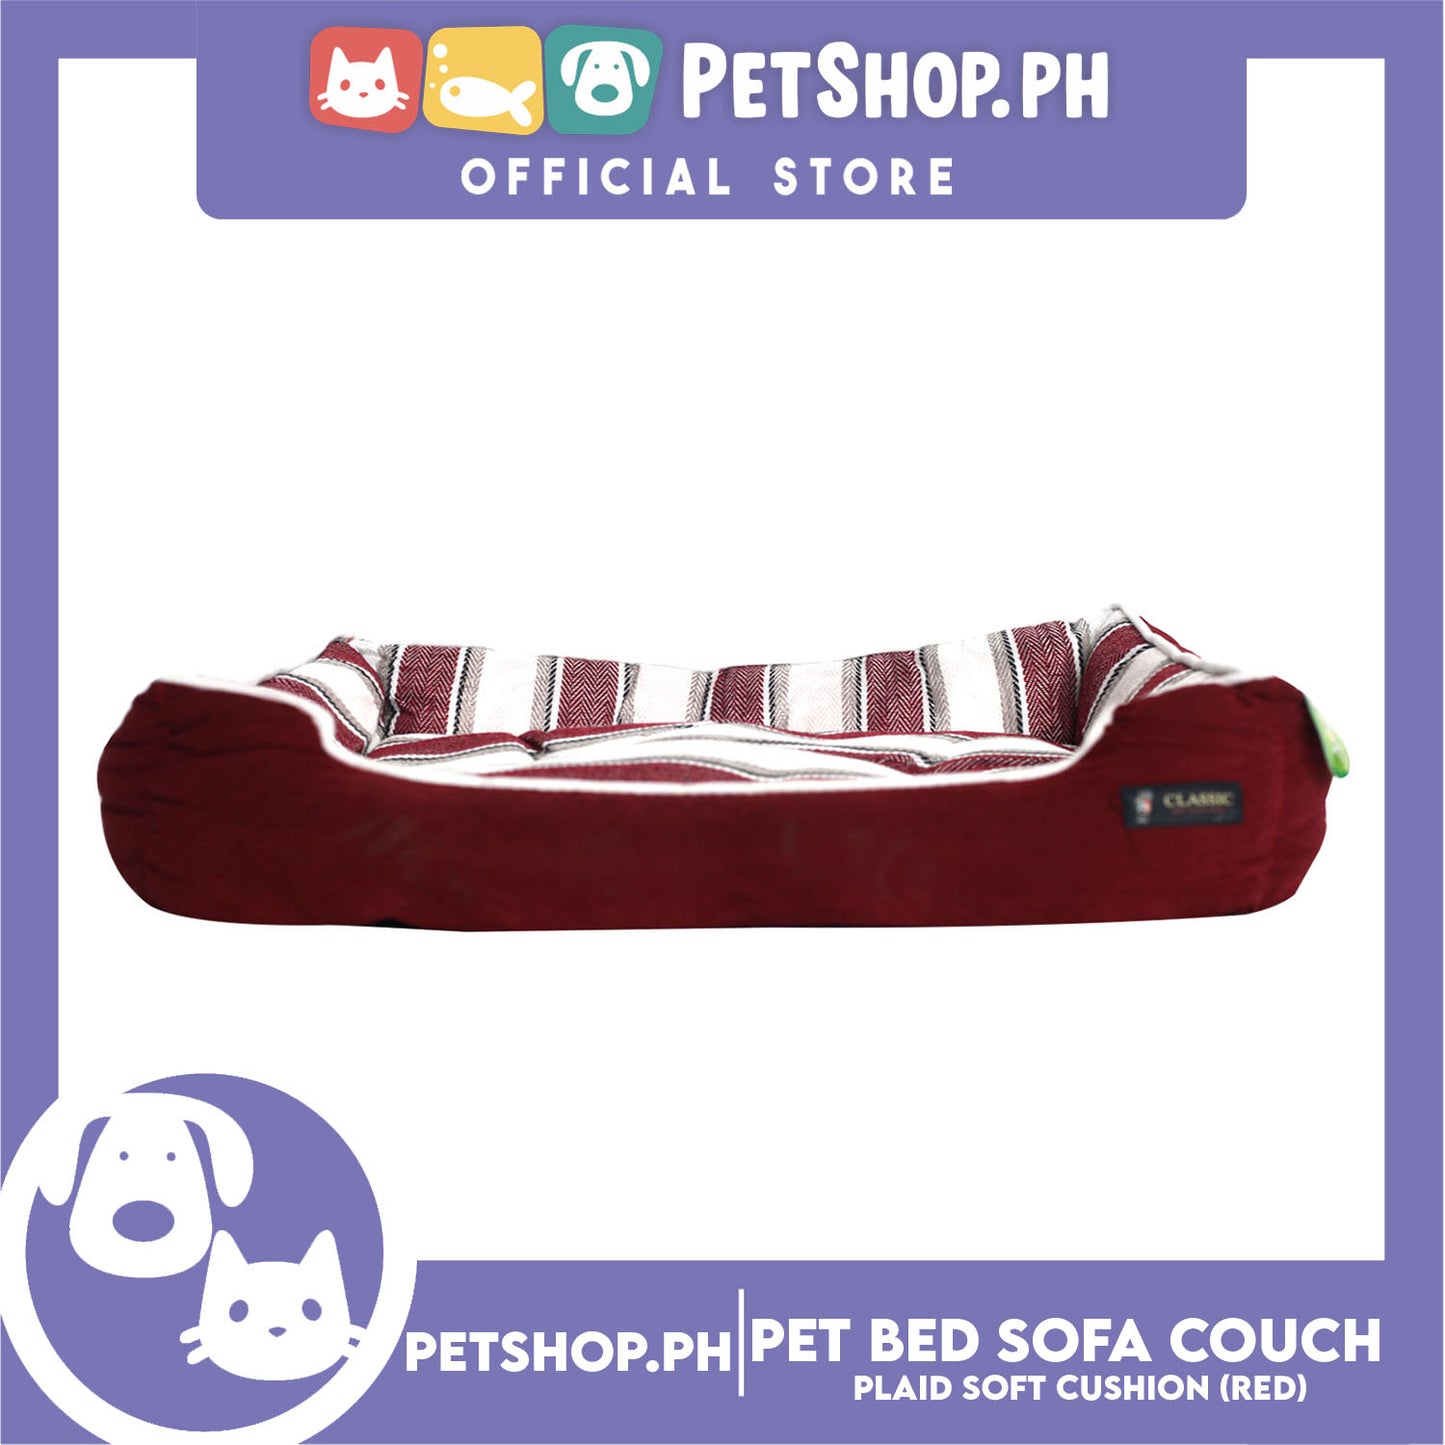 Pet Bed Sofa Couch Inner Plaid Design with Plaid Soft Cushion Small for Cats Dogs Small Breeds